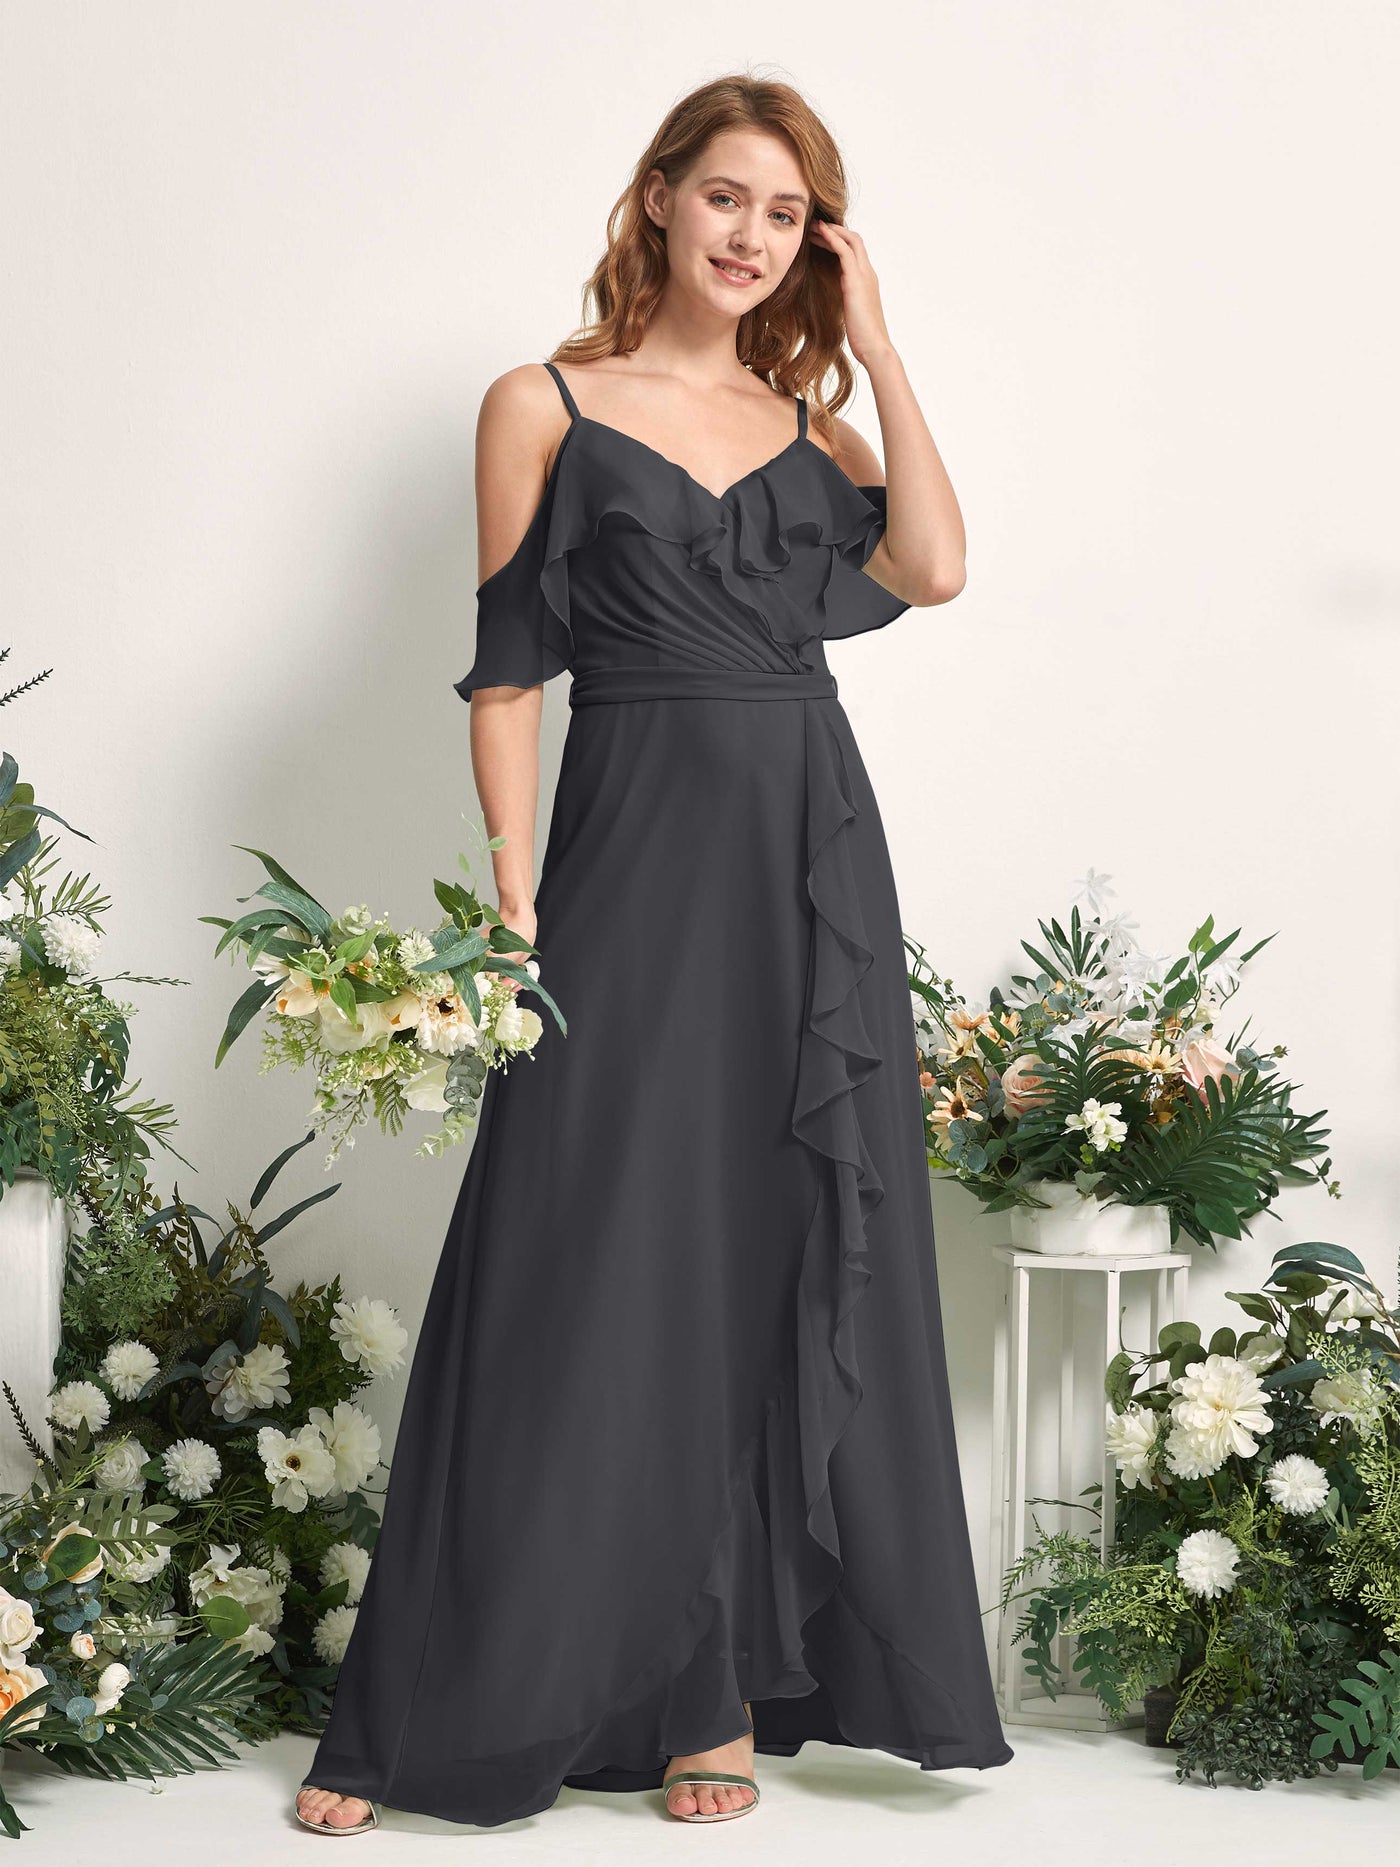 Bridesmaid Dress A-line Chiffon Spaghetti-straps Full Length Sleeveless Wedding Party Dress - Pewter (81227438)#color_pewter